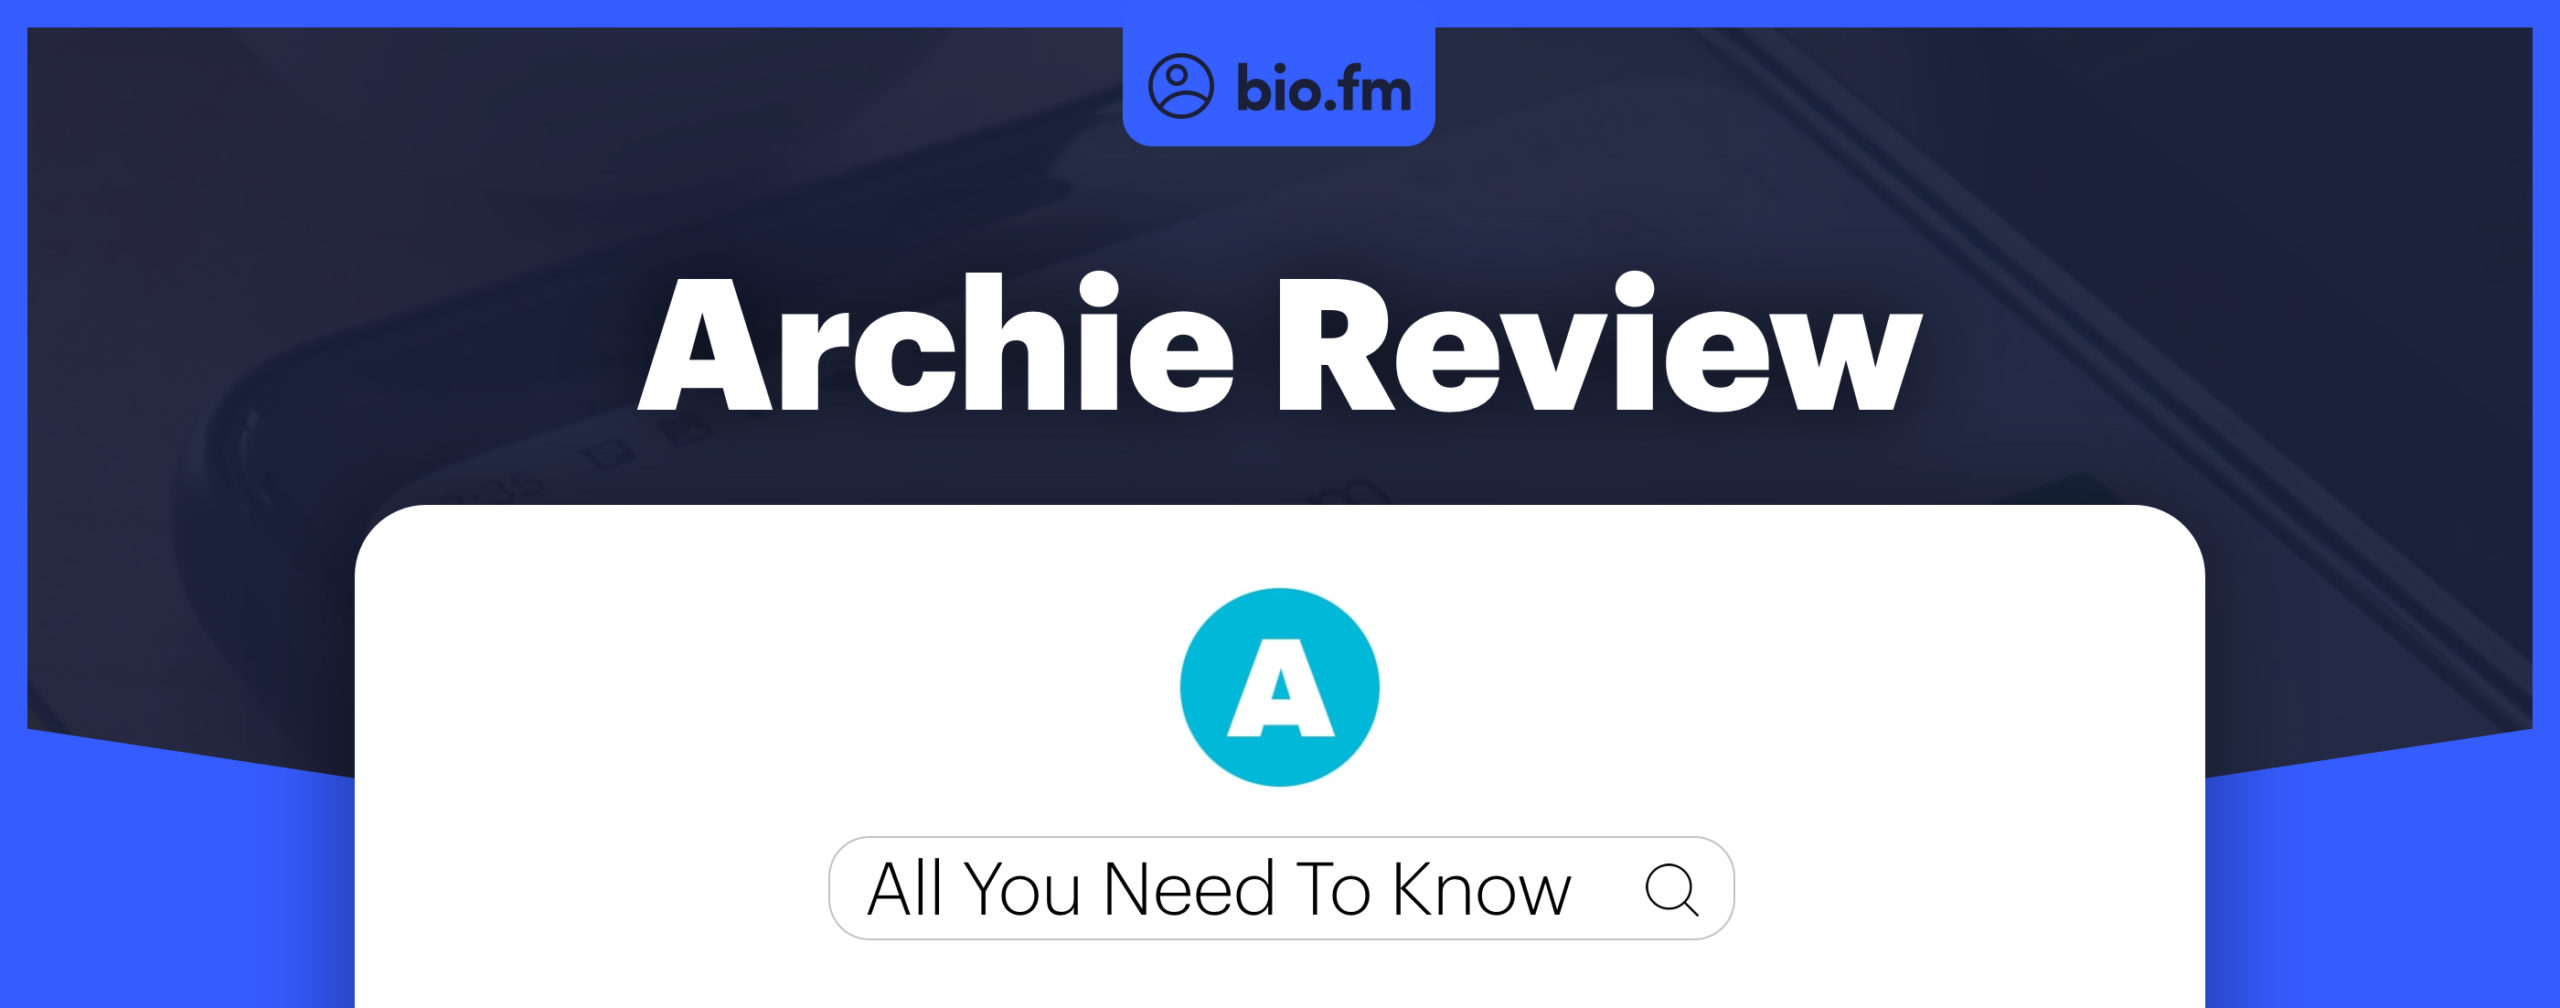 archie review featured image